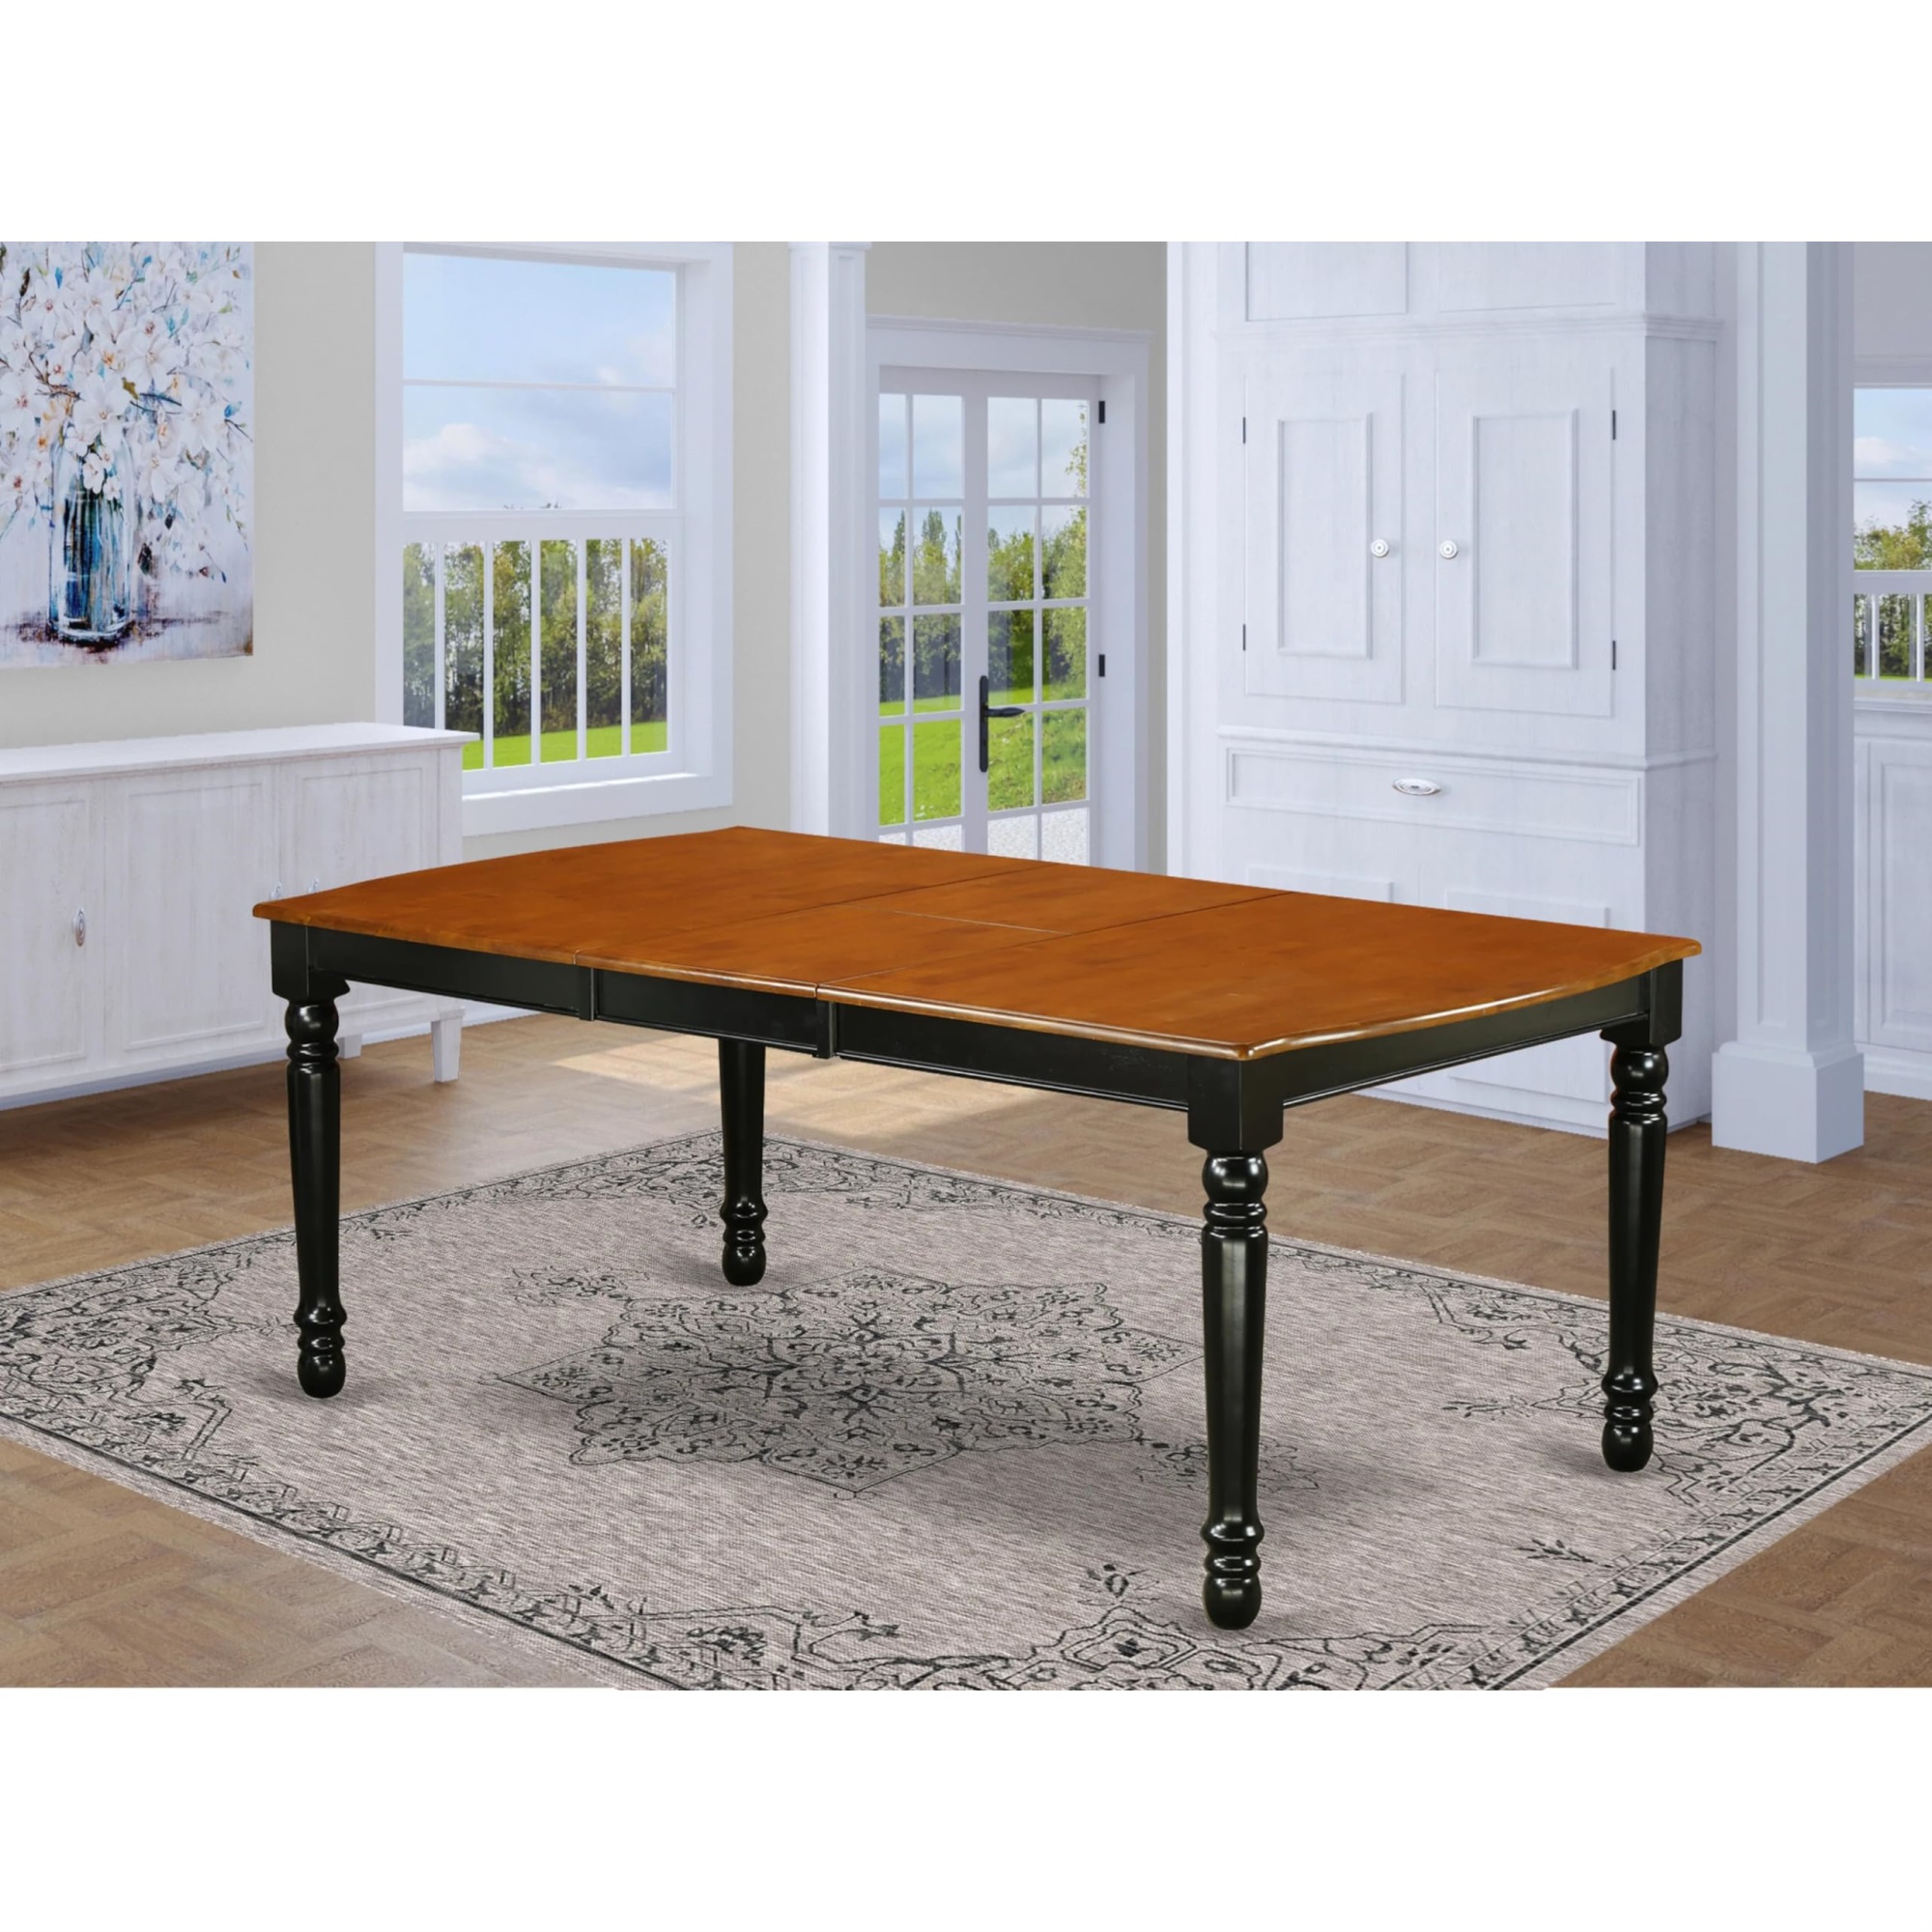 East West Furniture DOT-BCH-T Dover Dining Room table with 18" Butterfly Leaf -Black and Cherry Finish.